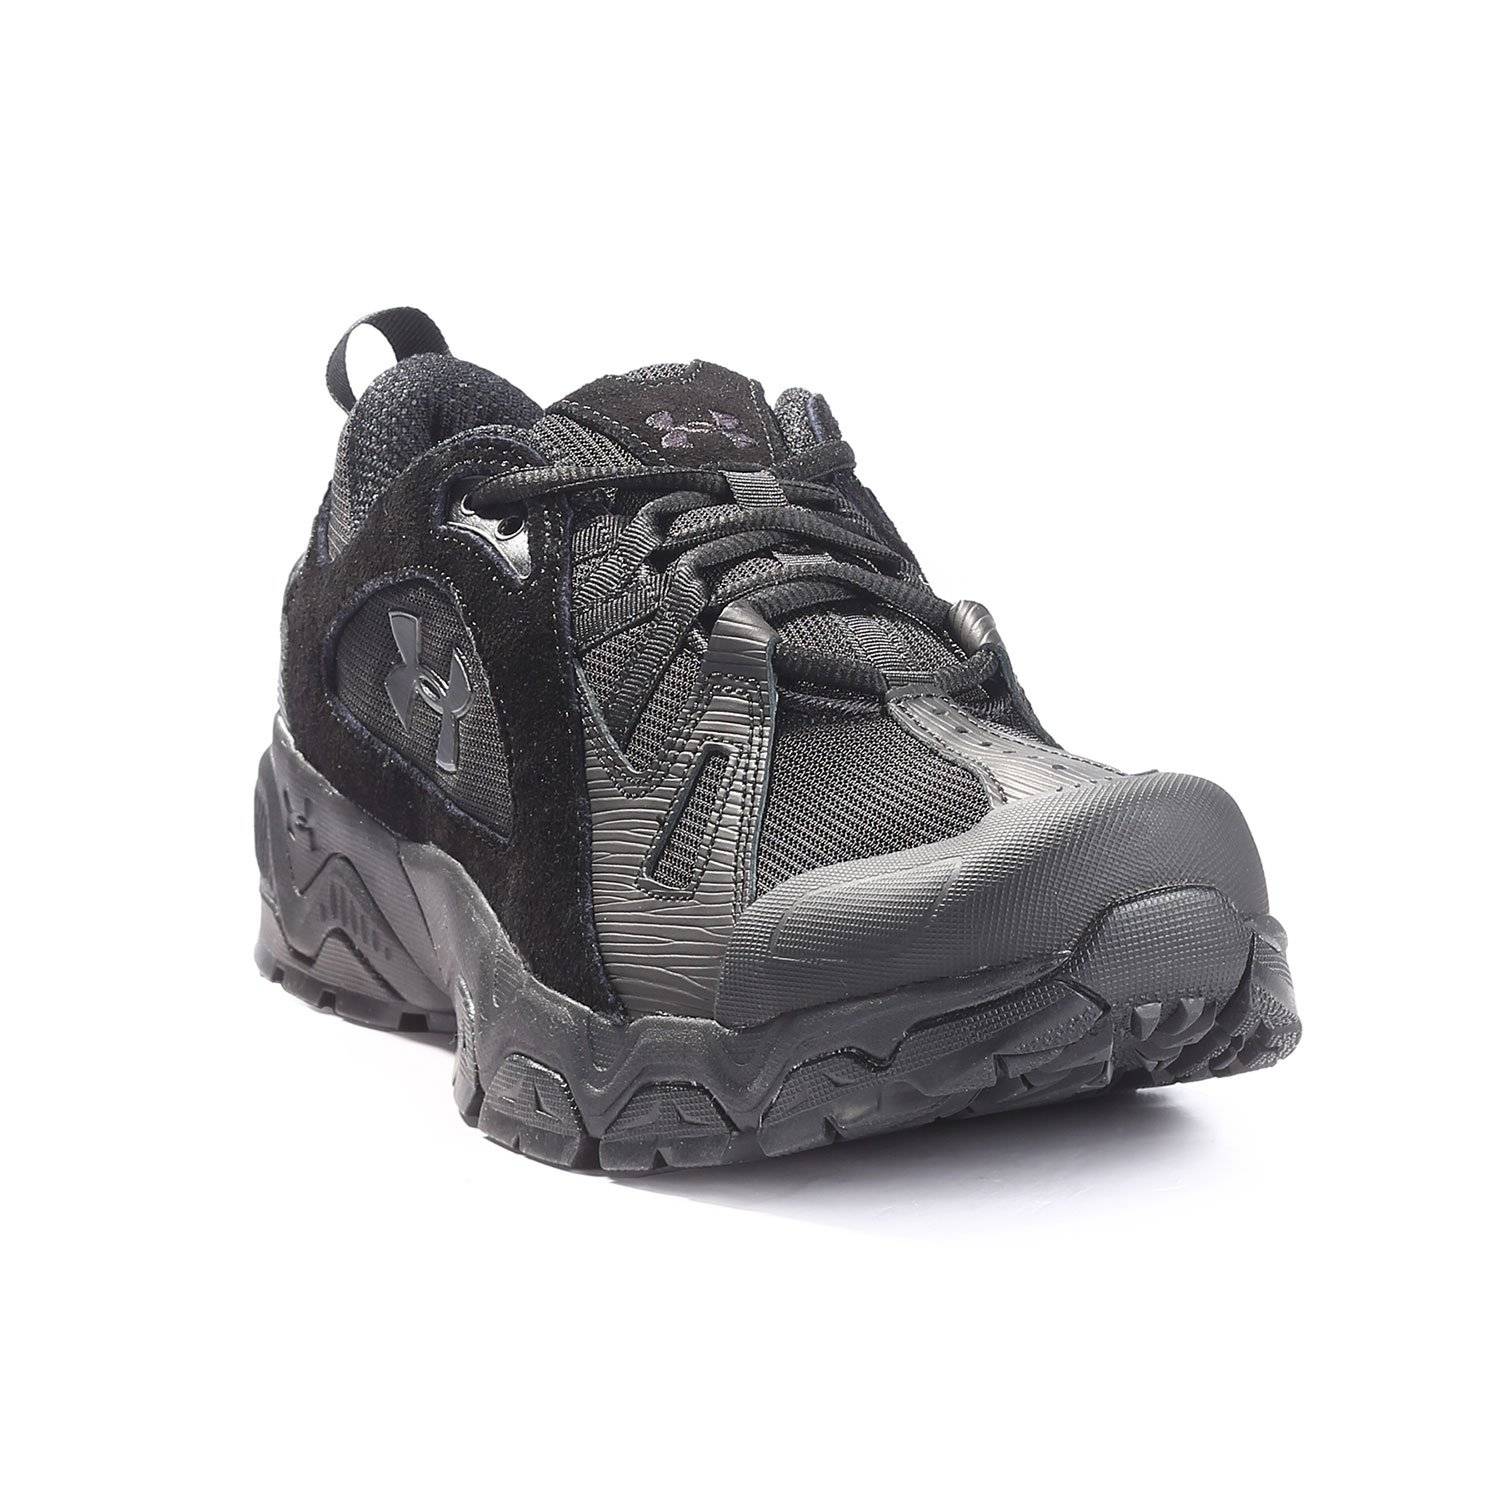 Under Armour Chetco 2.0 Tactical Shoes